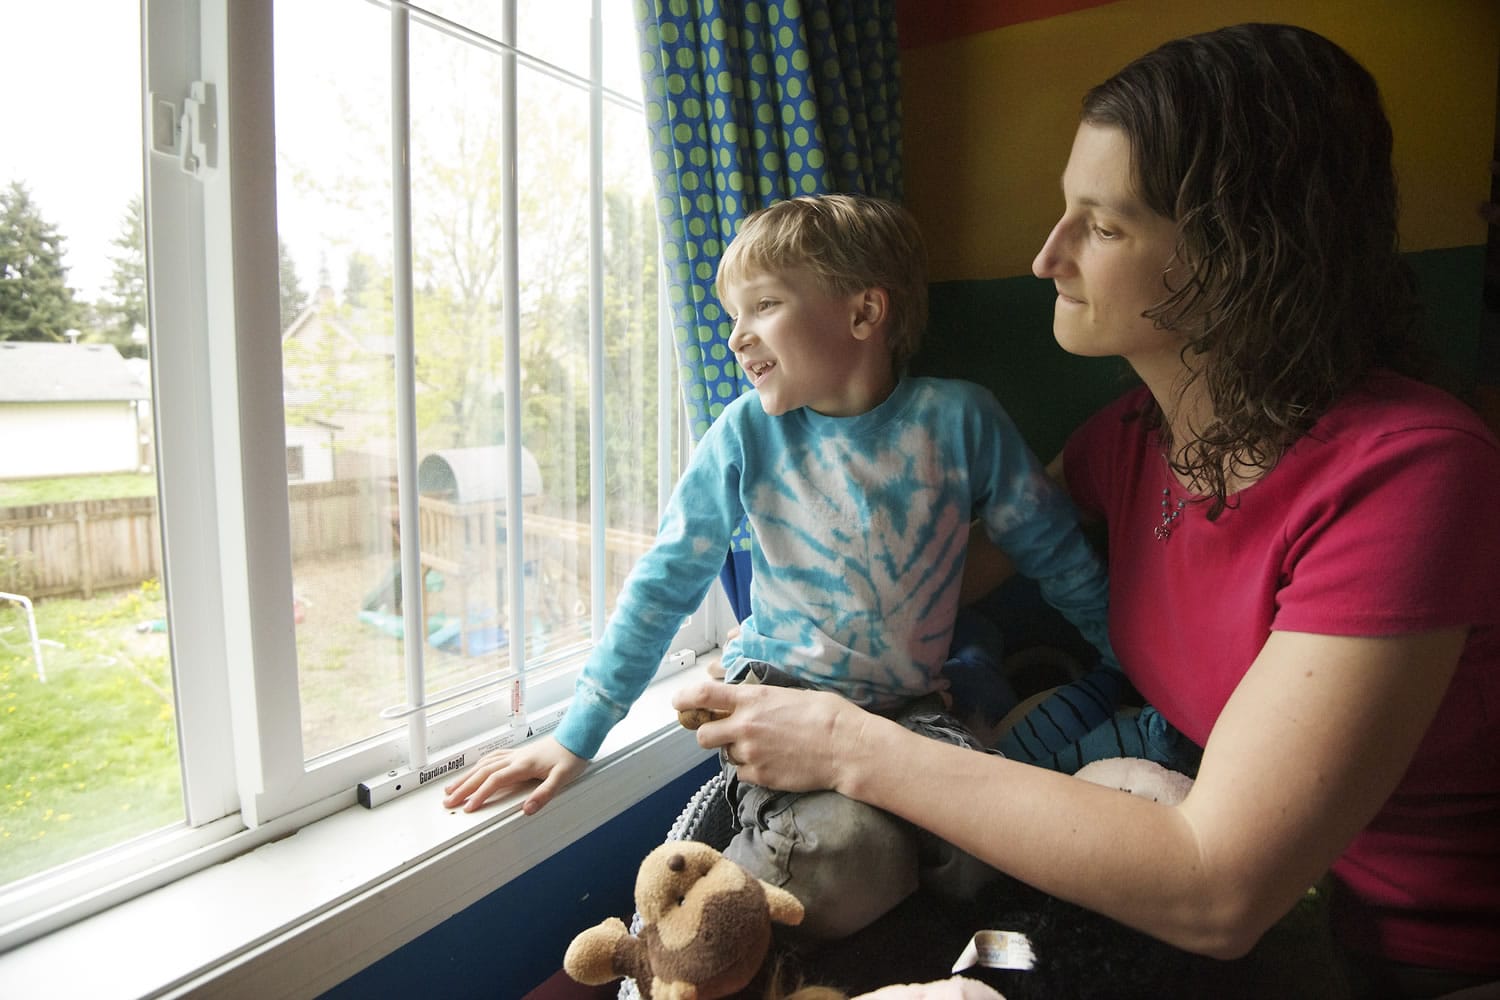 Thomas Keen Cunningham, 6, looks out his bedroom window as he is held by his mother, Becca Keen Cunningham. Thomas suffered life-threatening injuries when he fell from the window in 2010; through aggressive and extensive therapy, he has recovered.